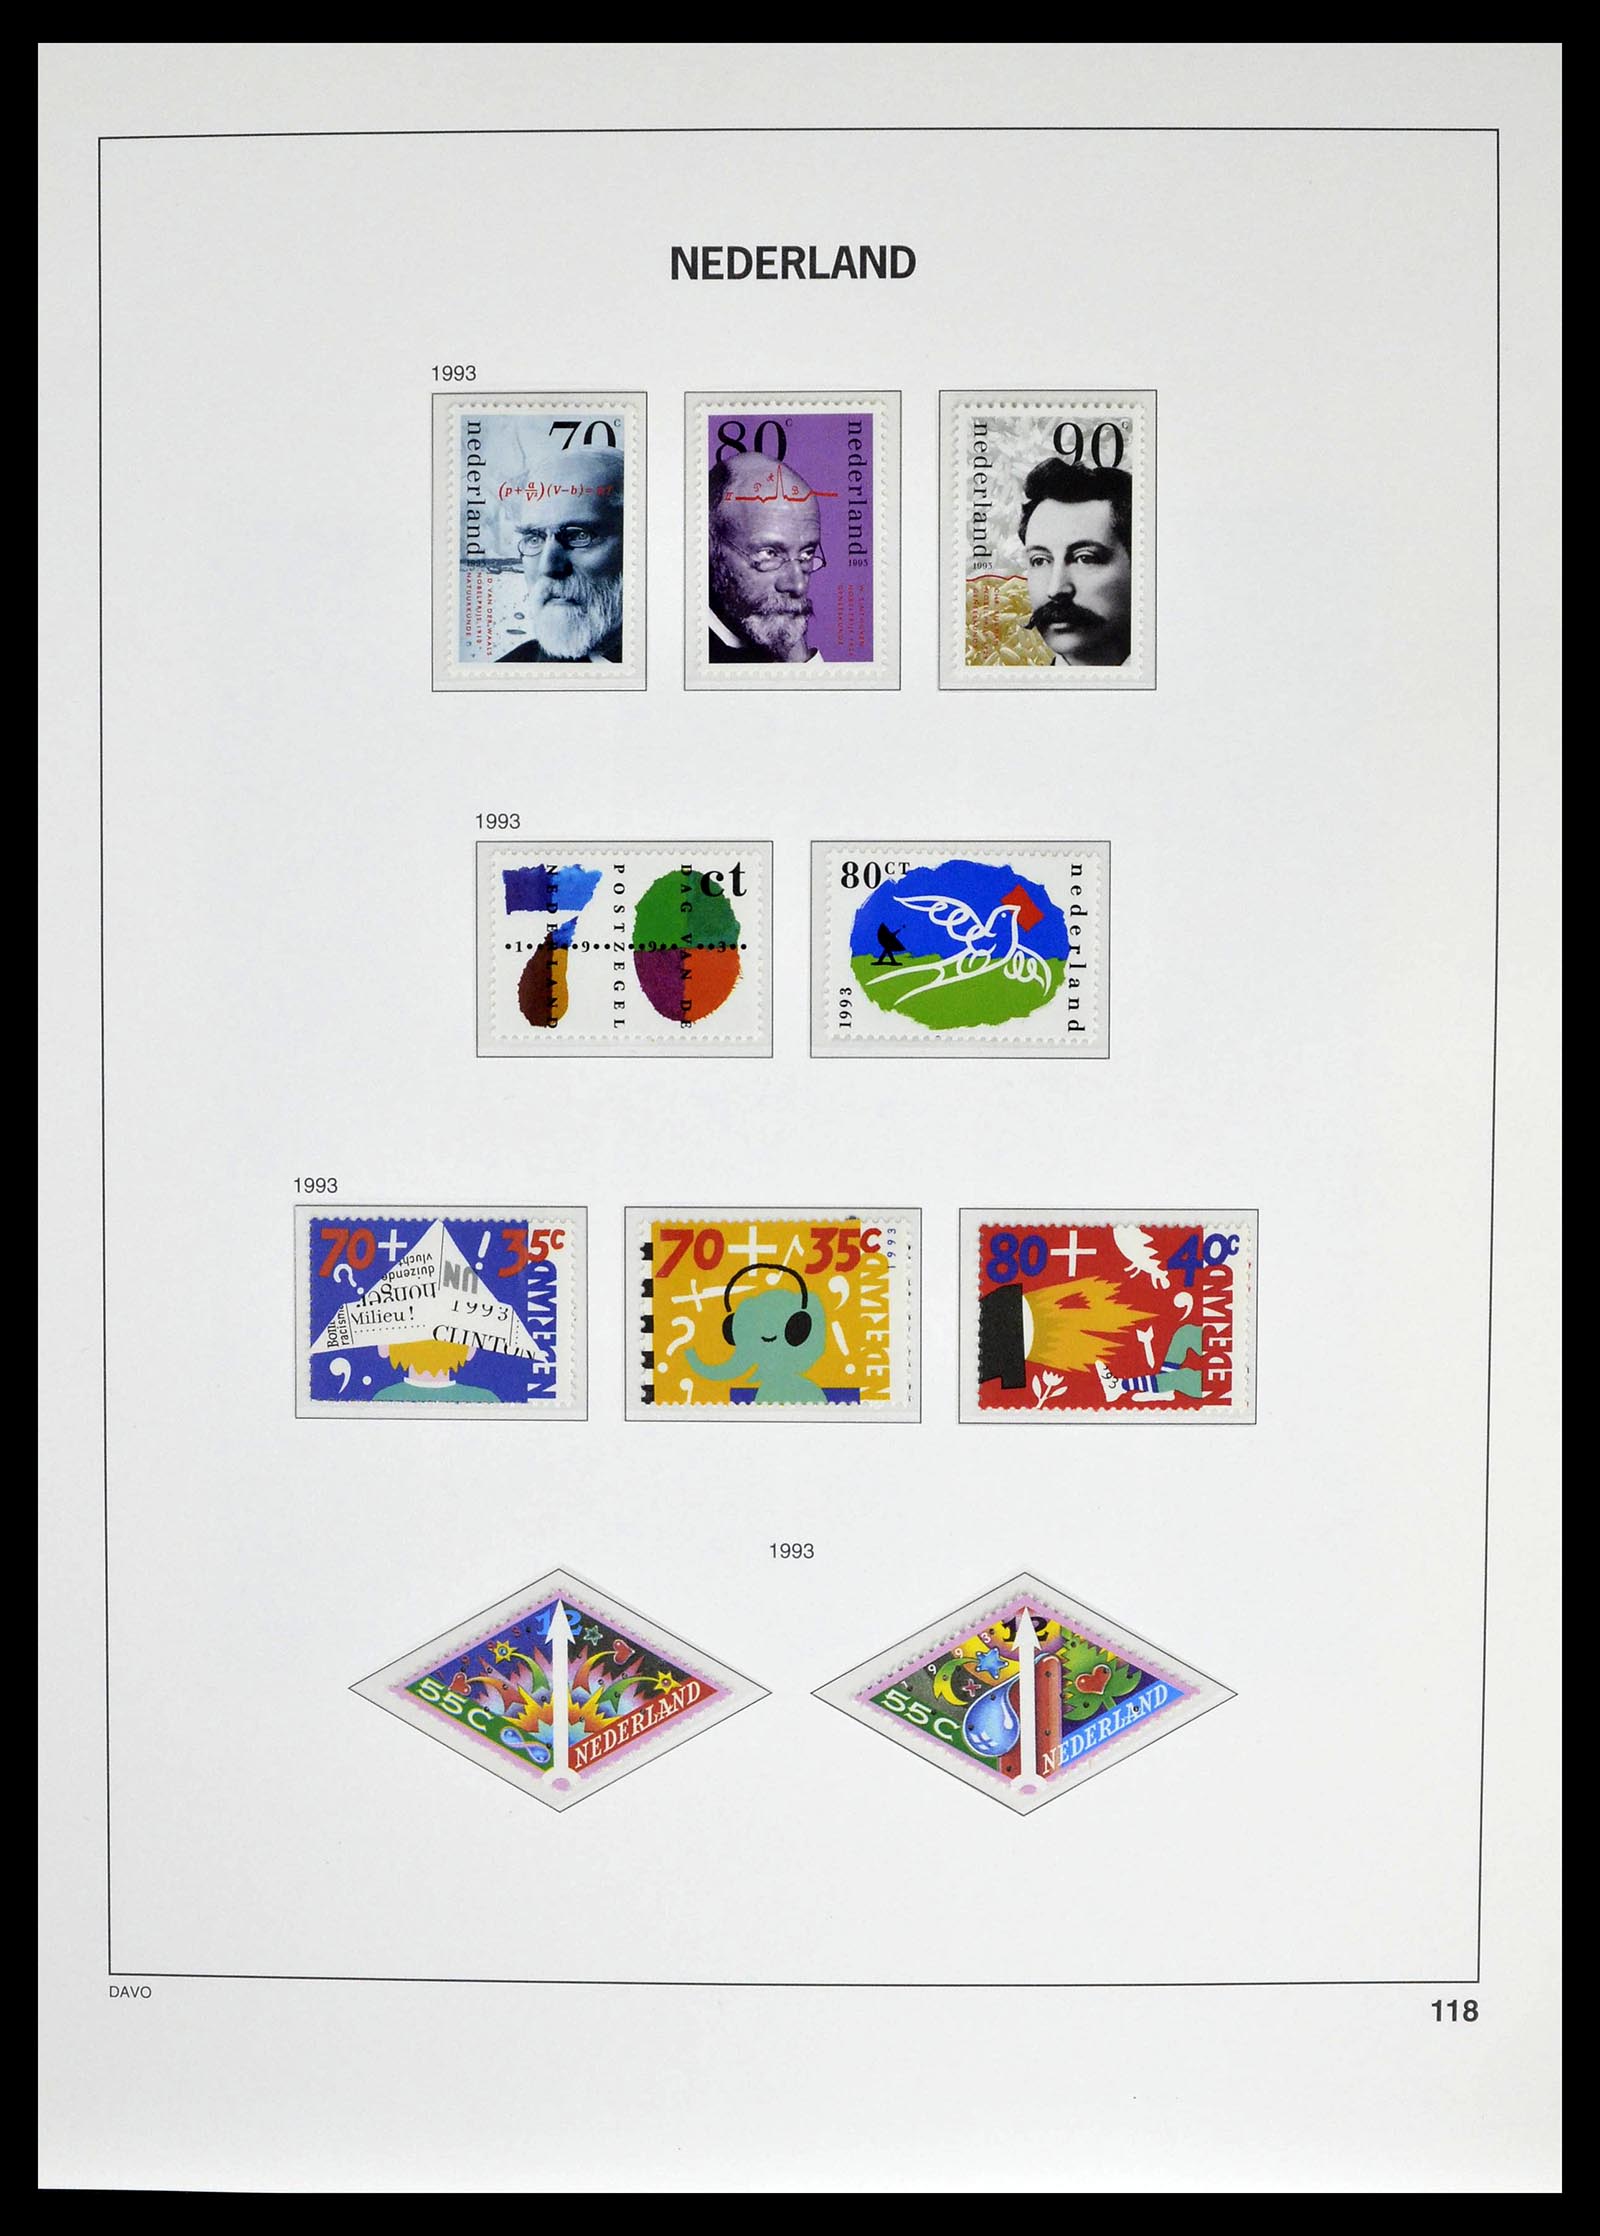 39136 0070 - Stamp collection 39136 Netherlands 1975-2020!